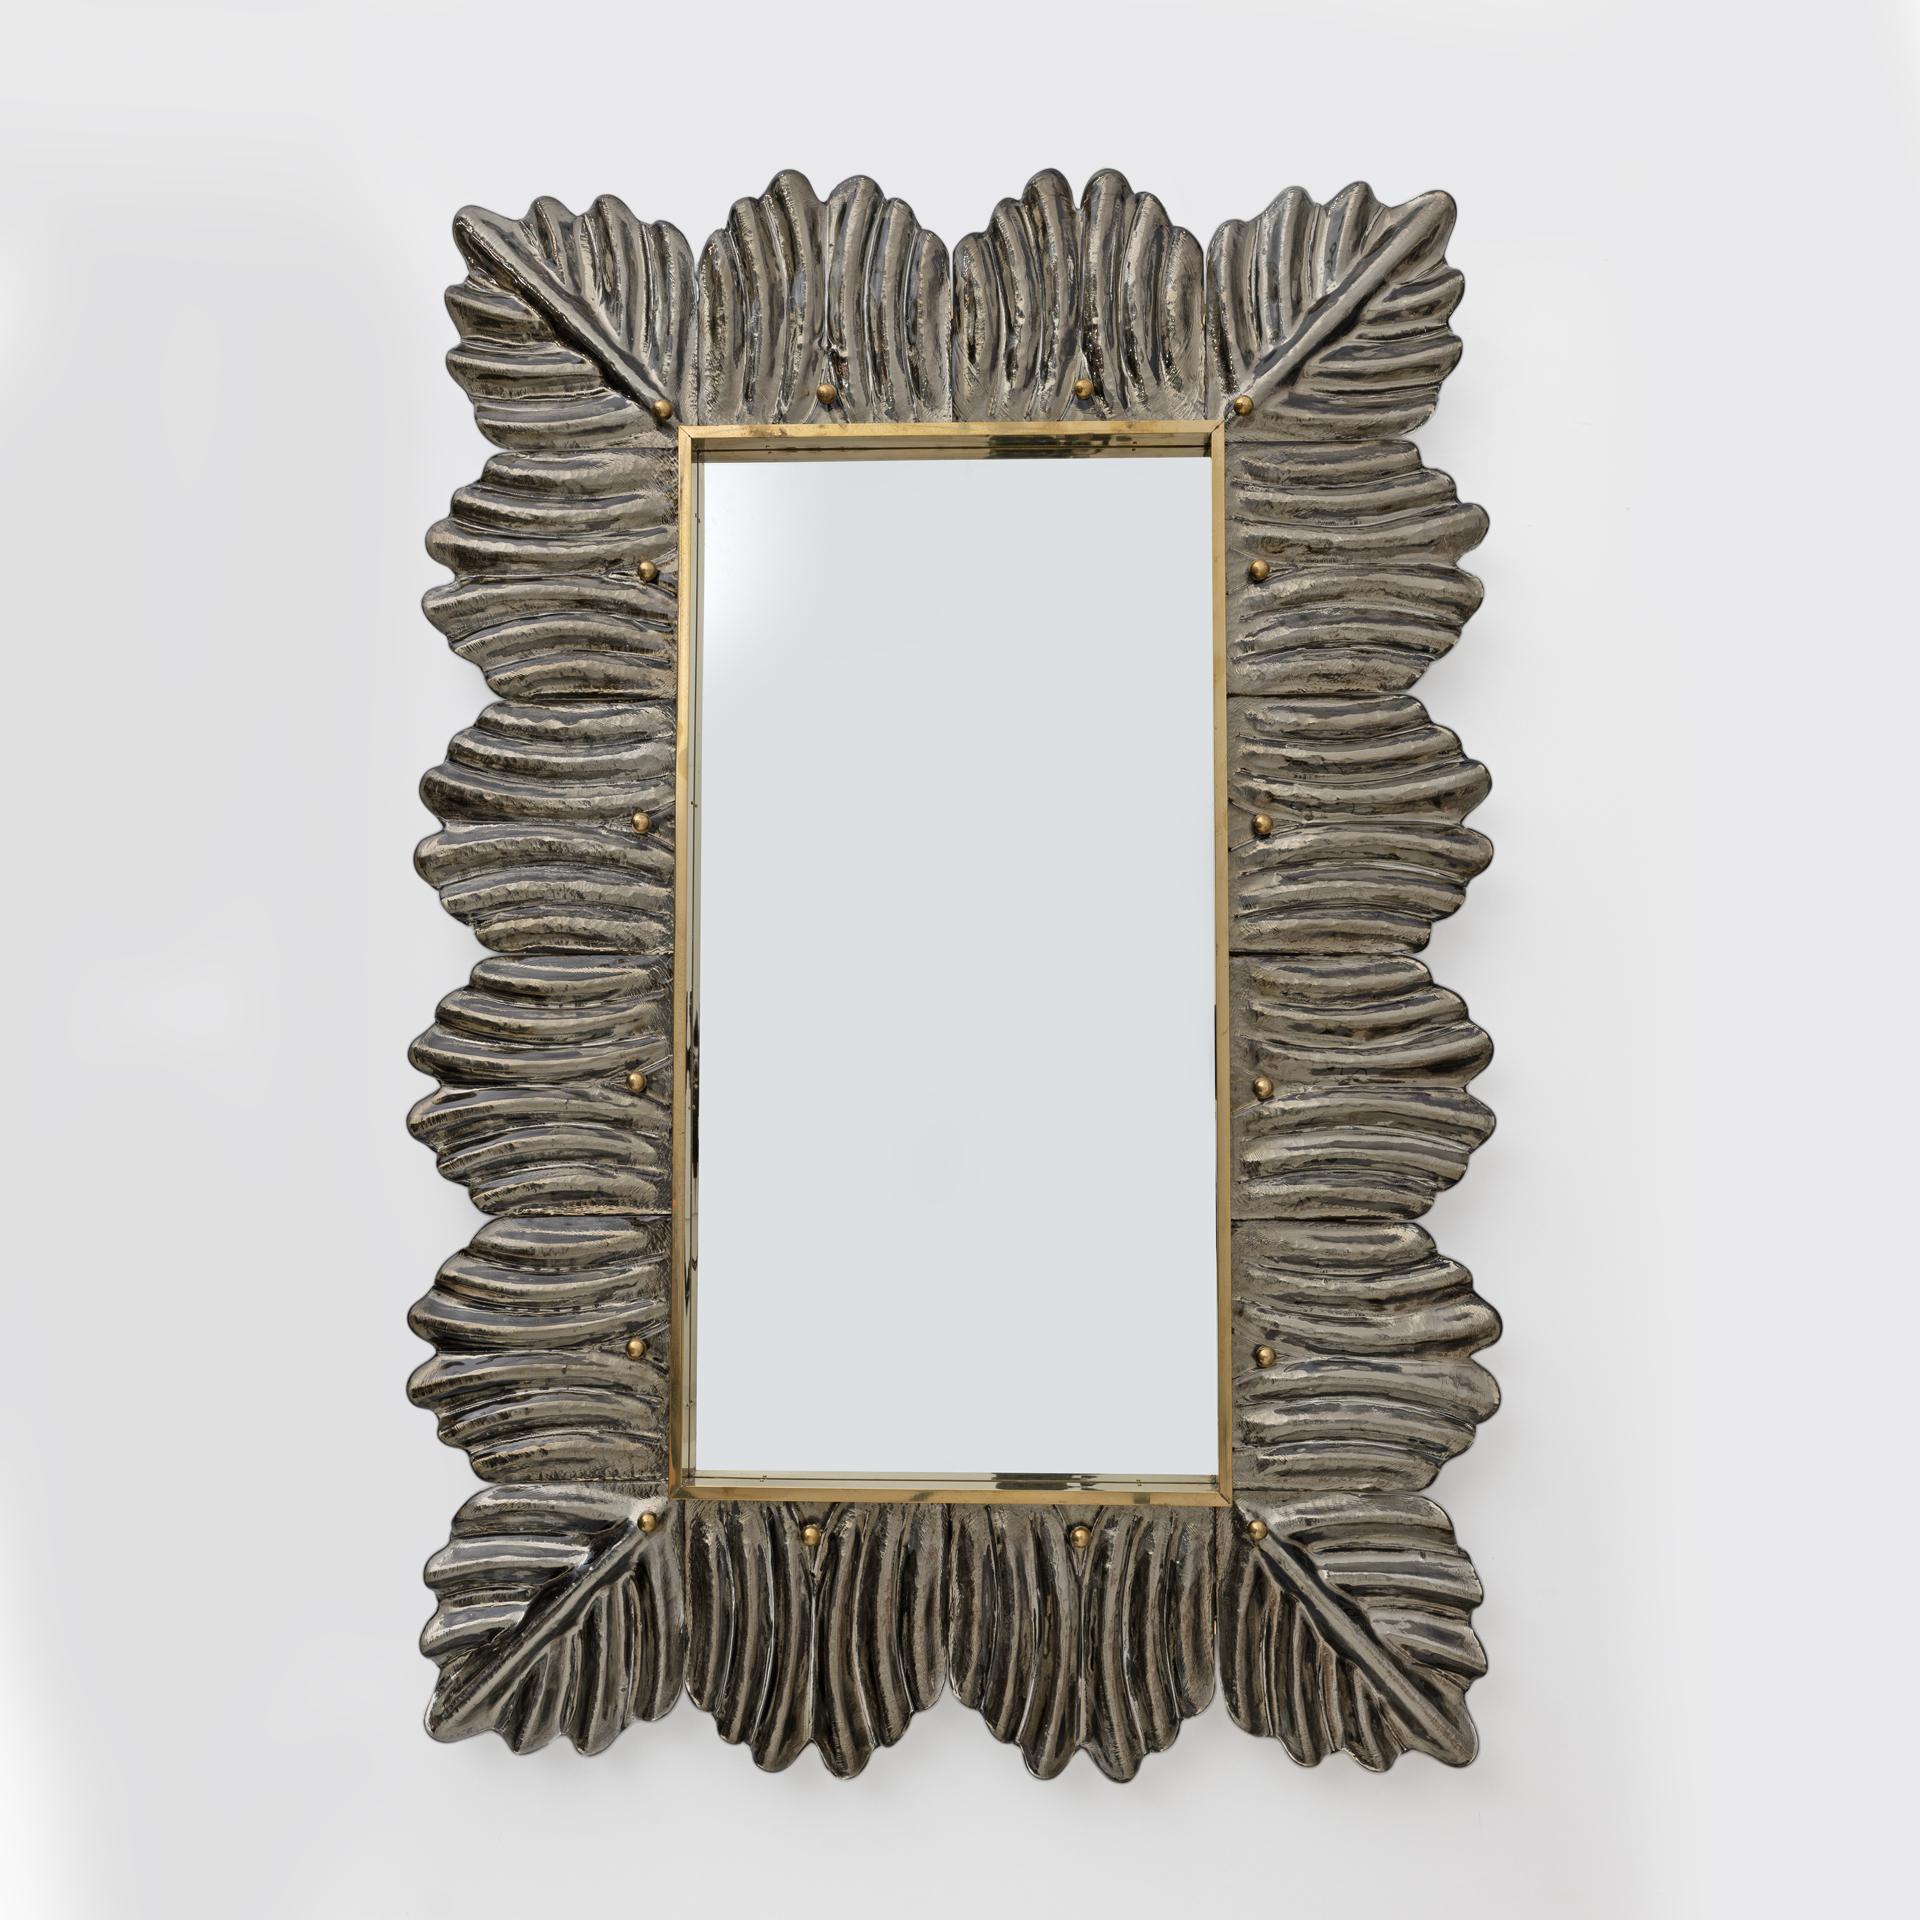 Wall mirror in bronze-coloured Murano artistic glass. With a beautiful shape and excellent dimensions, the wall mirror is a real design object. The structure of the wall mirror is made of wood, where the Murano glass is housed. The mirror frame is